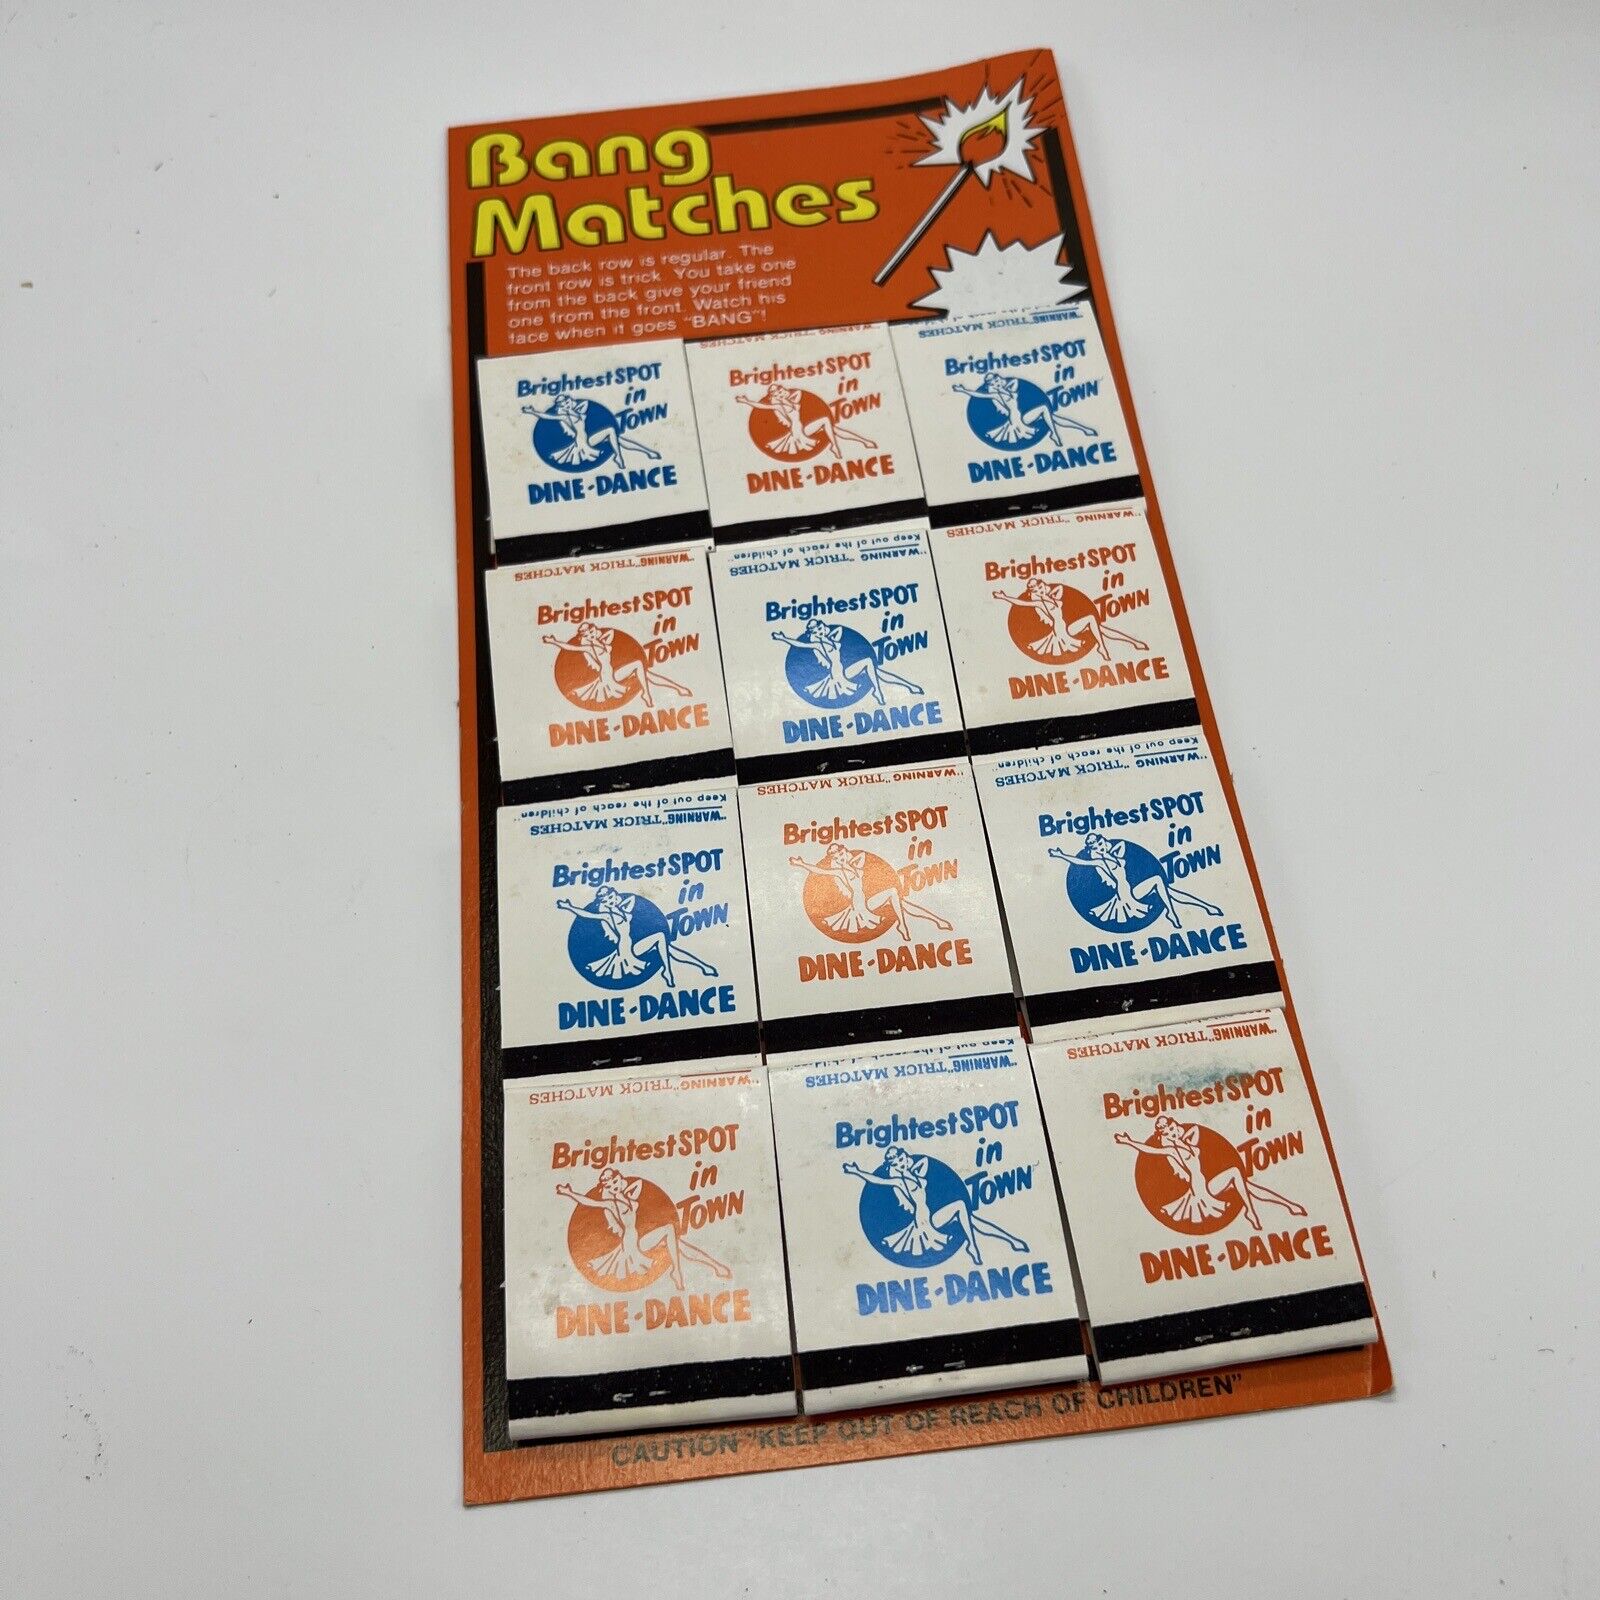 Vintage BANG Matches - Store Display - Novelty Item / Trick Matches